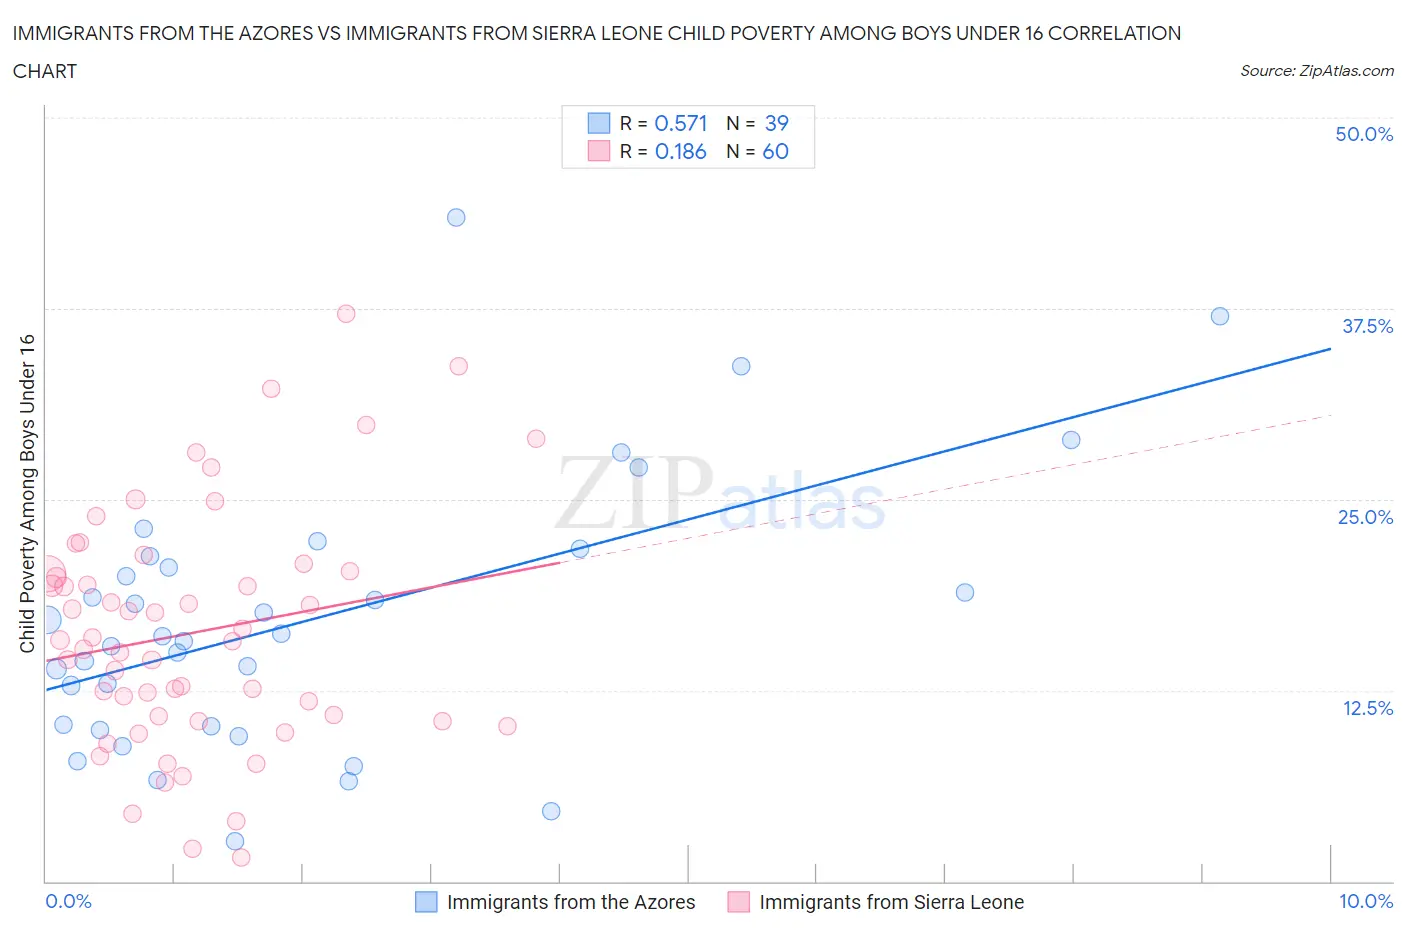 Immigrants from the Azores vs Immigrants from Sierra Leone Child Poverty Among Boys Under 16